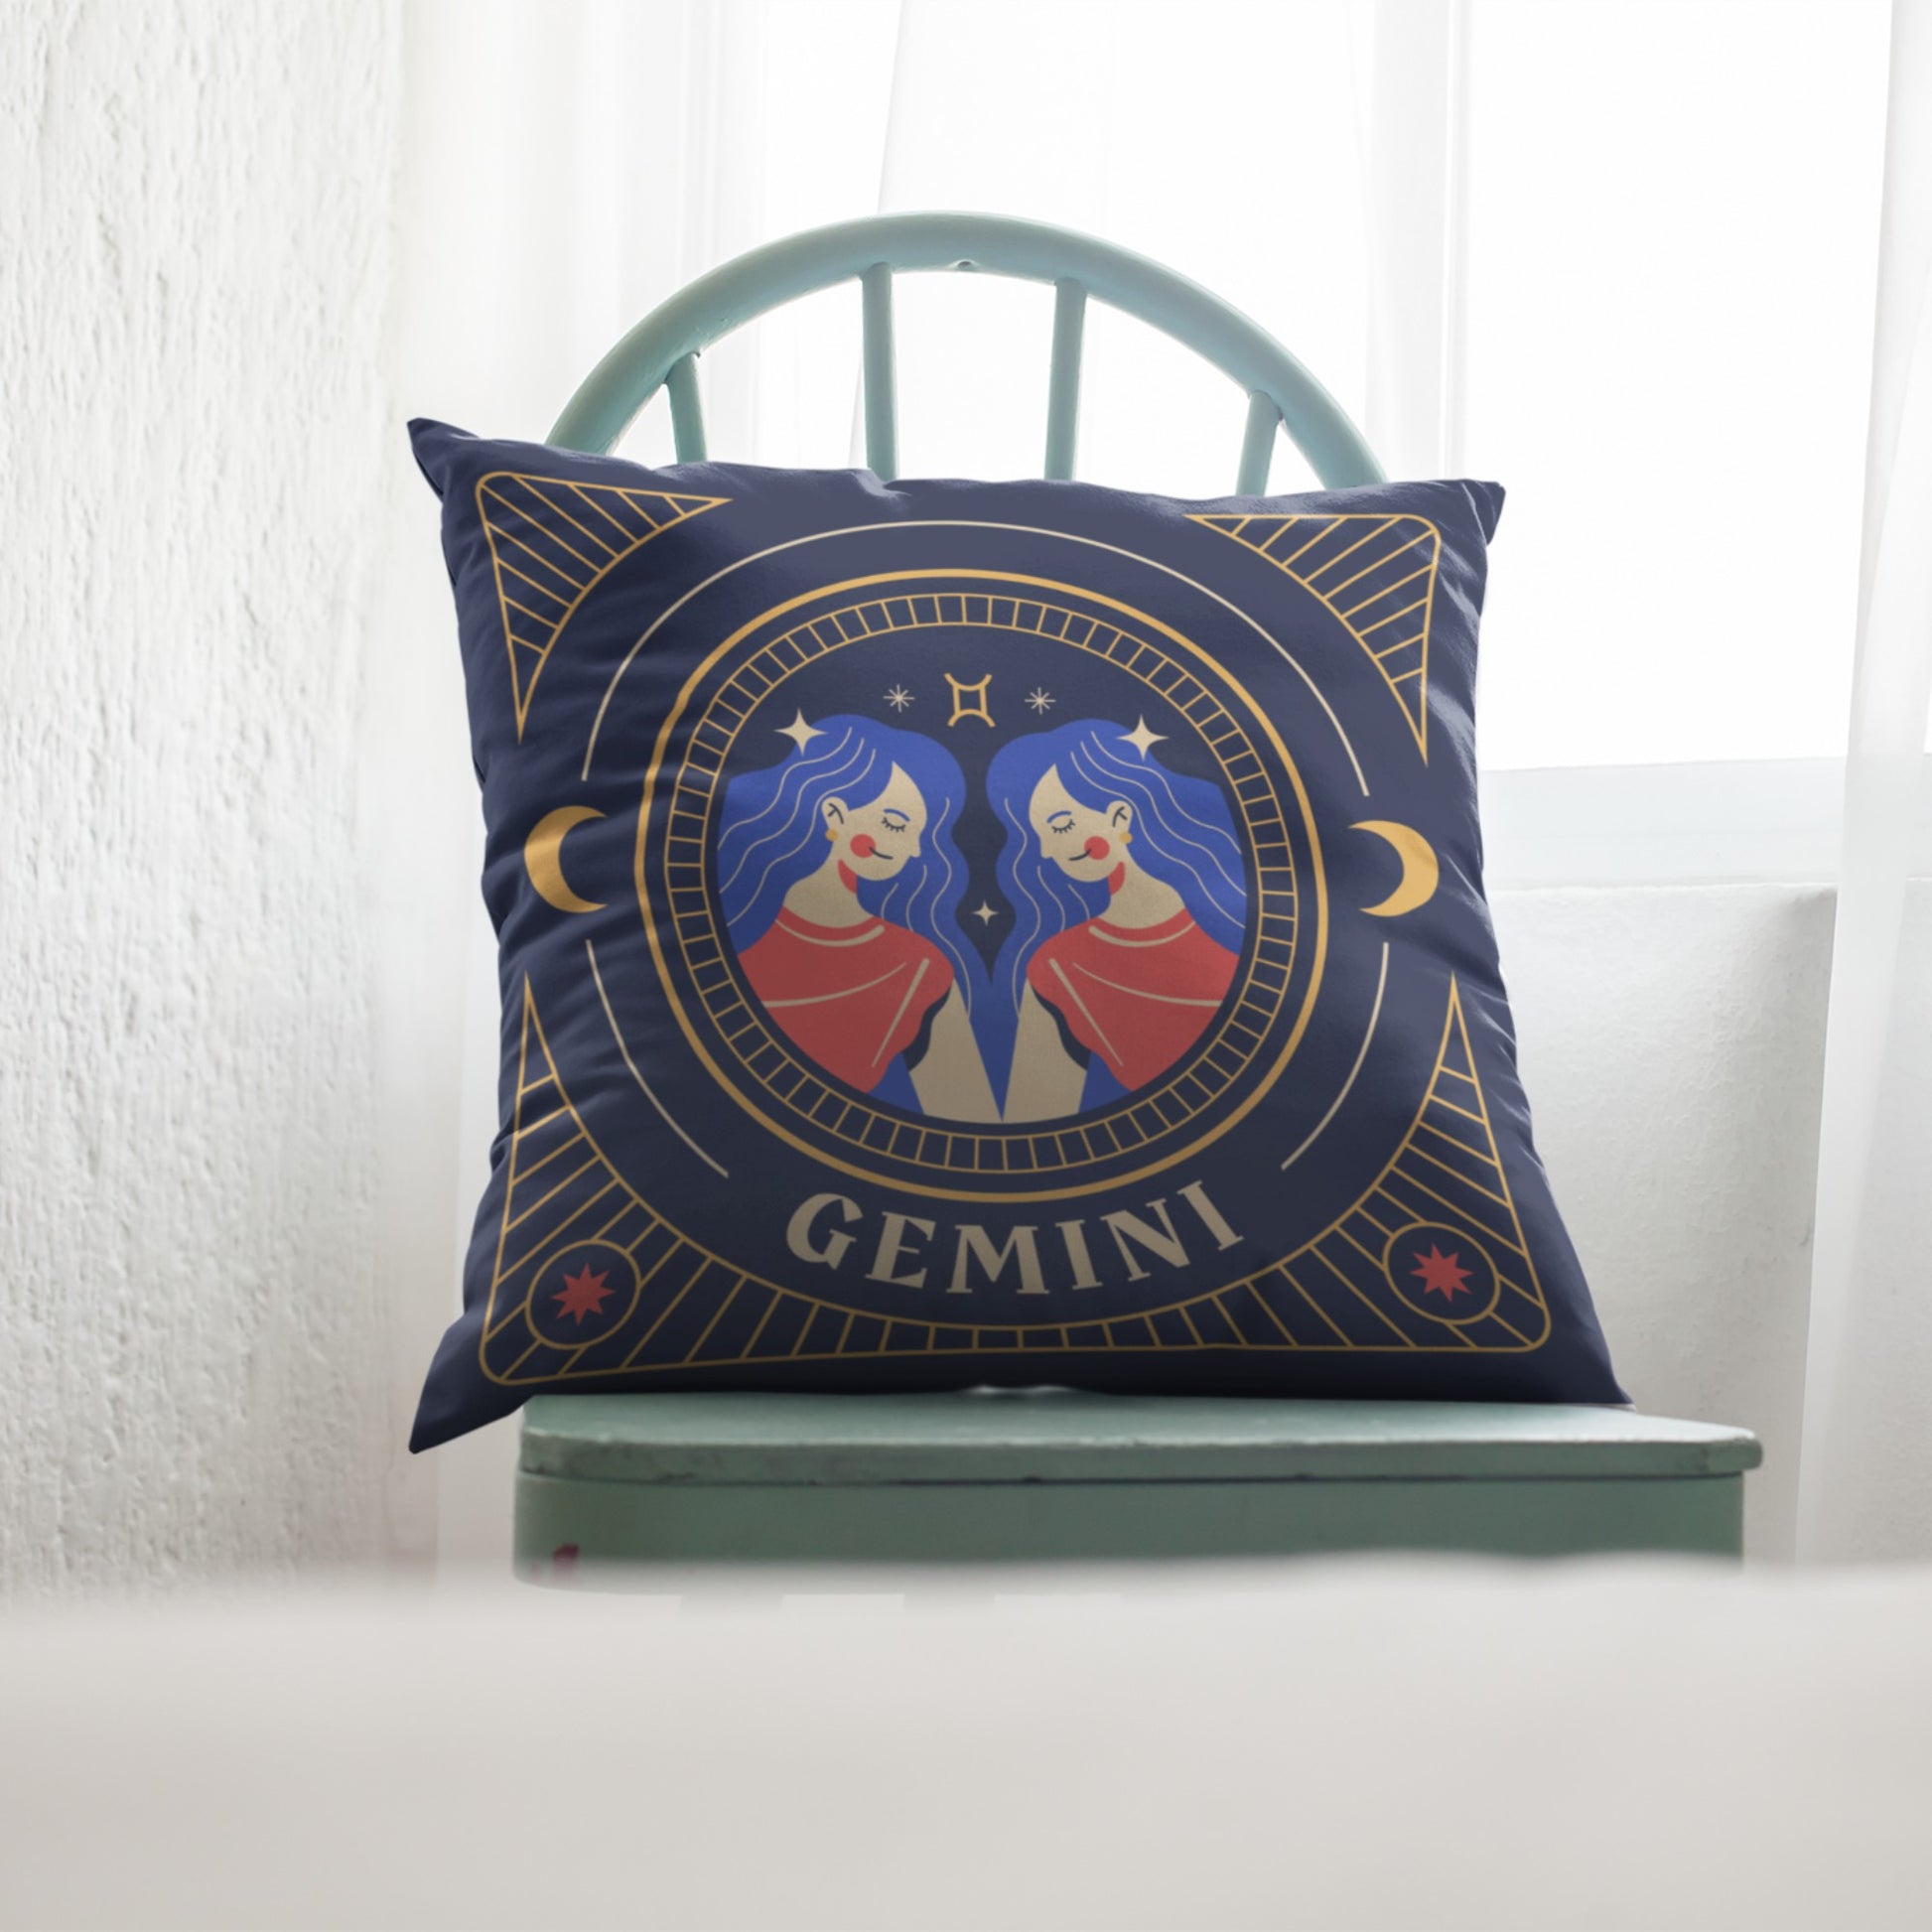 Stylish Astrological Sign Pillow Design